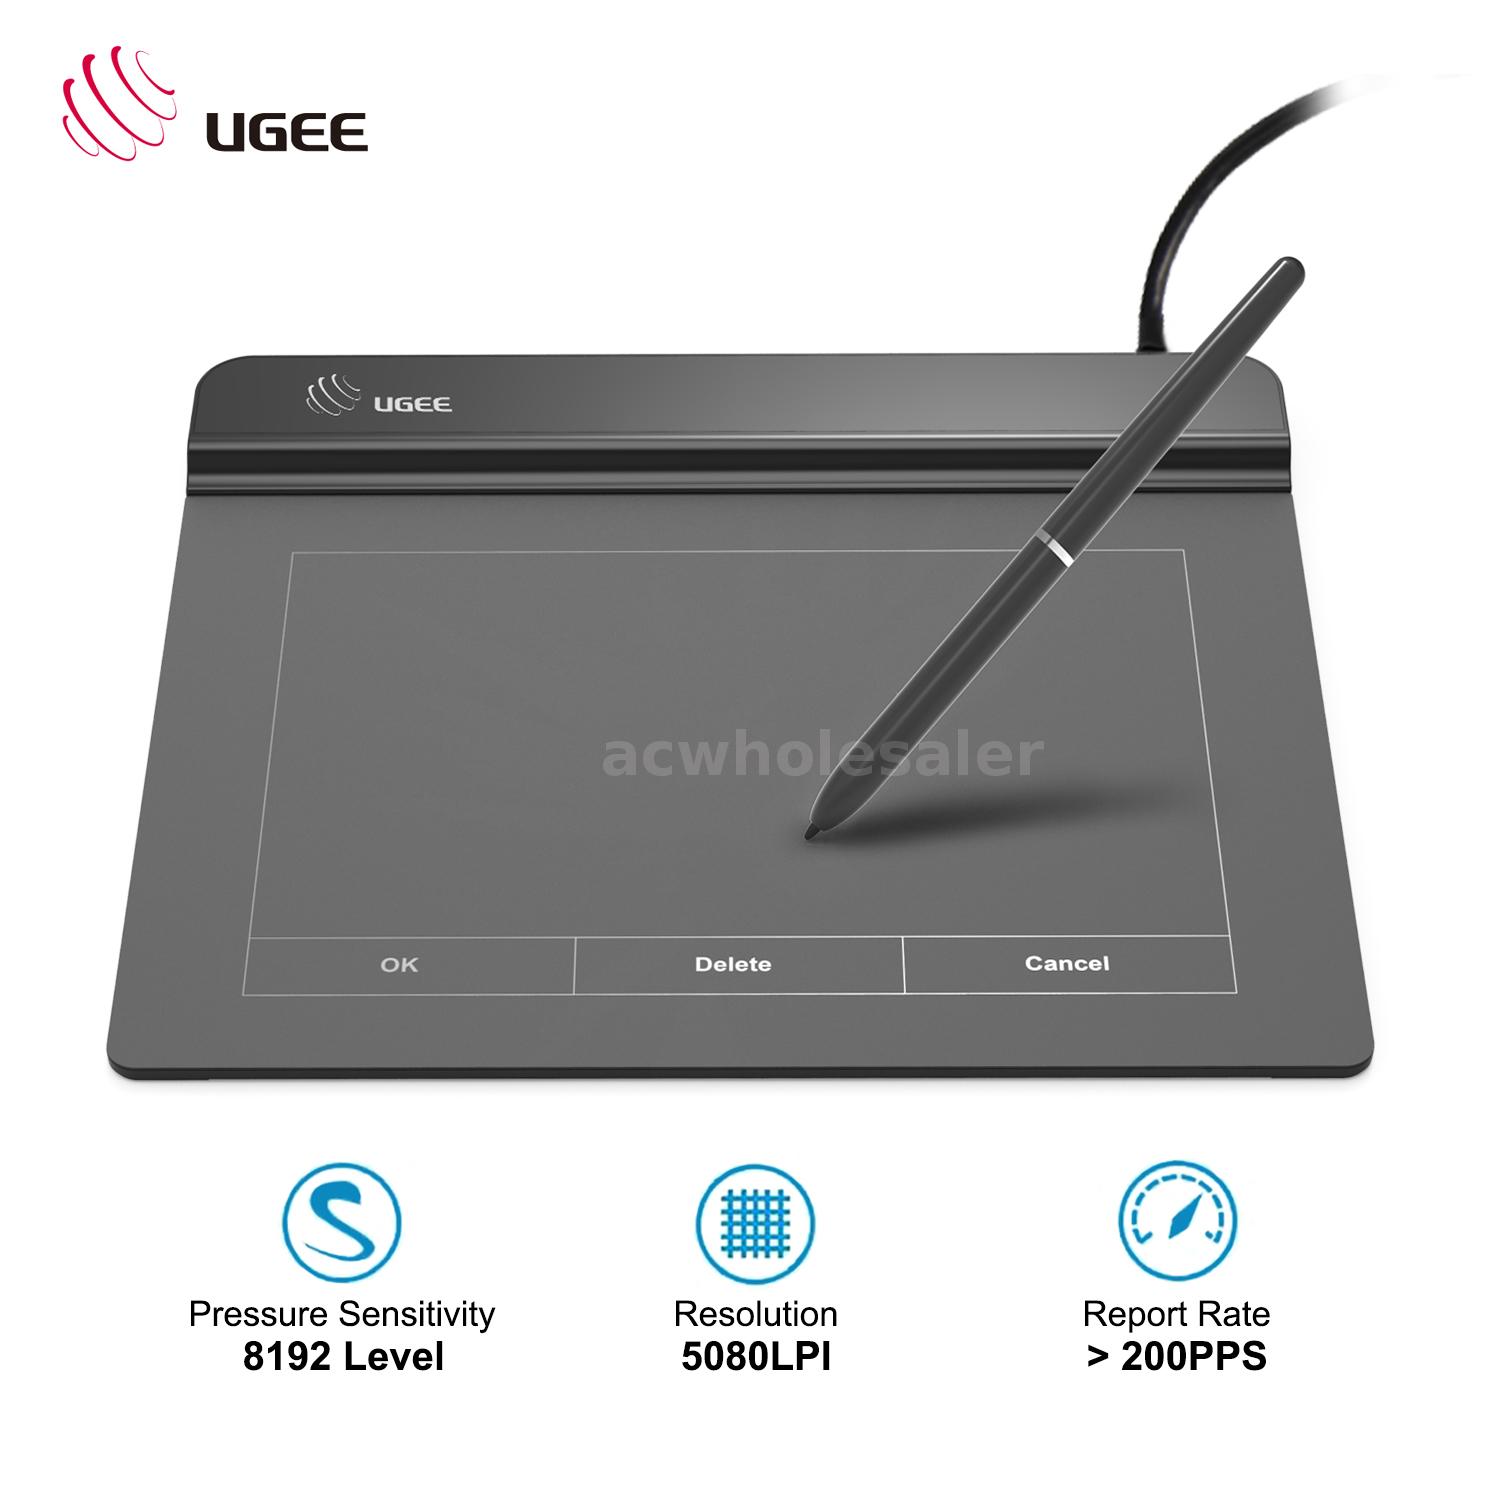 ugee 1910b software window small